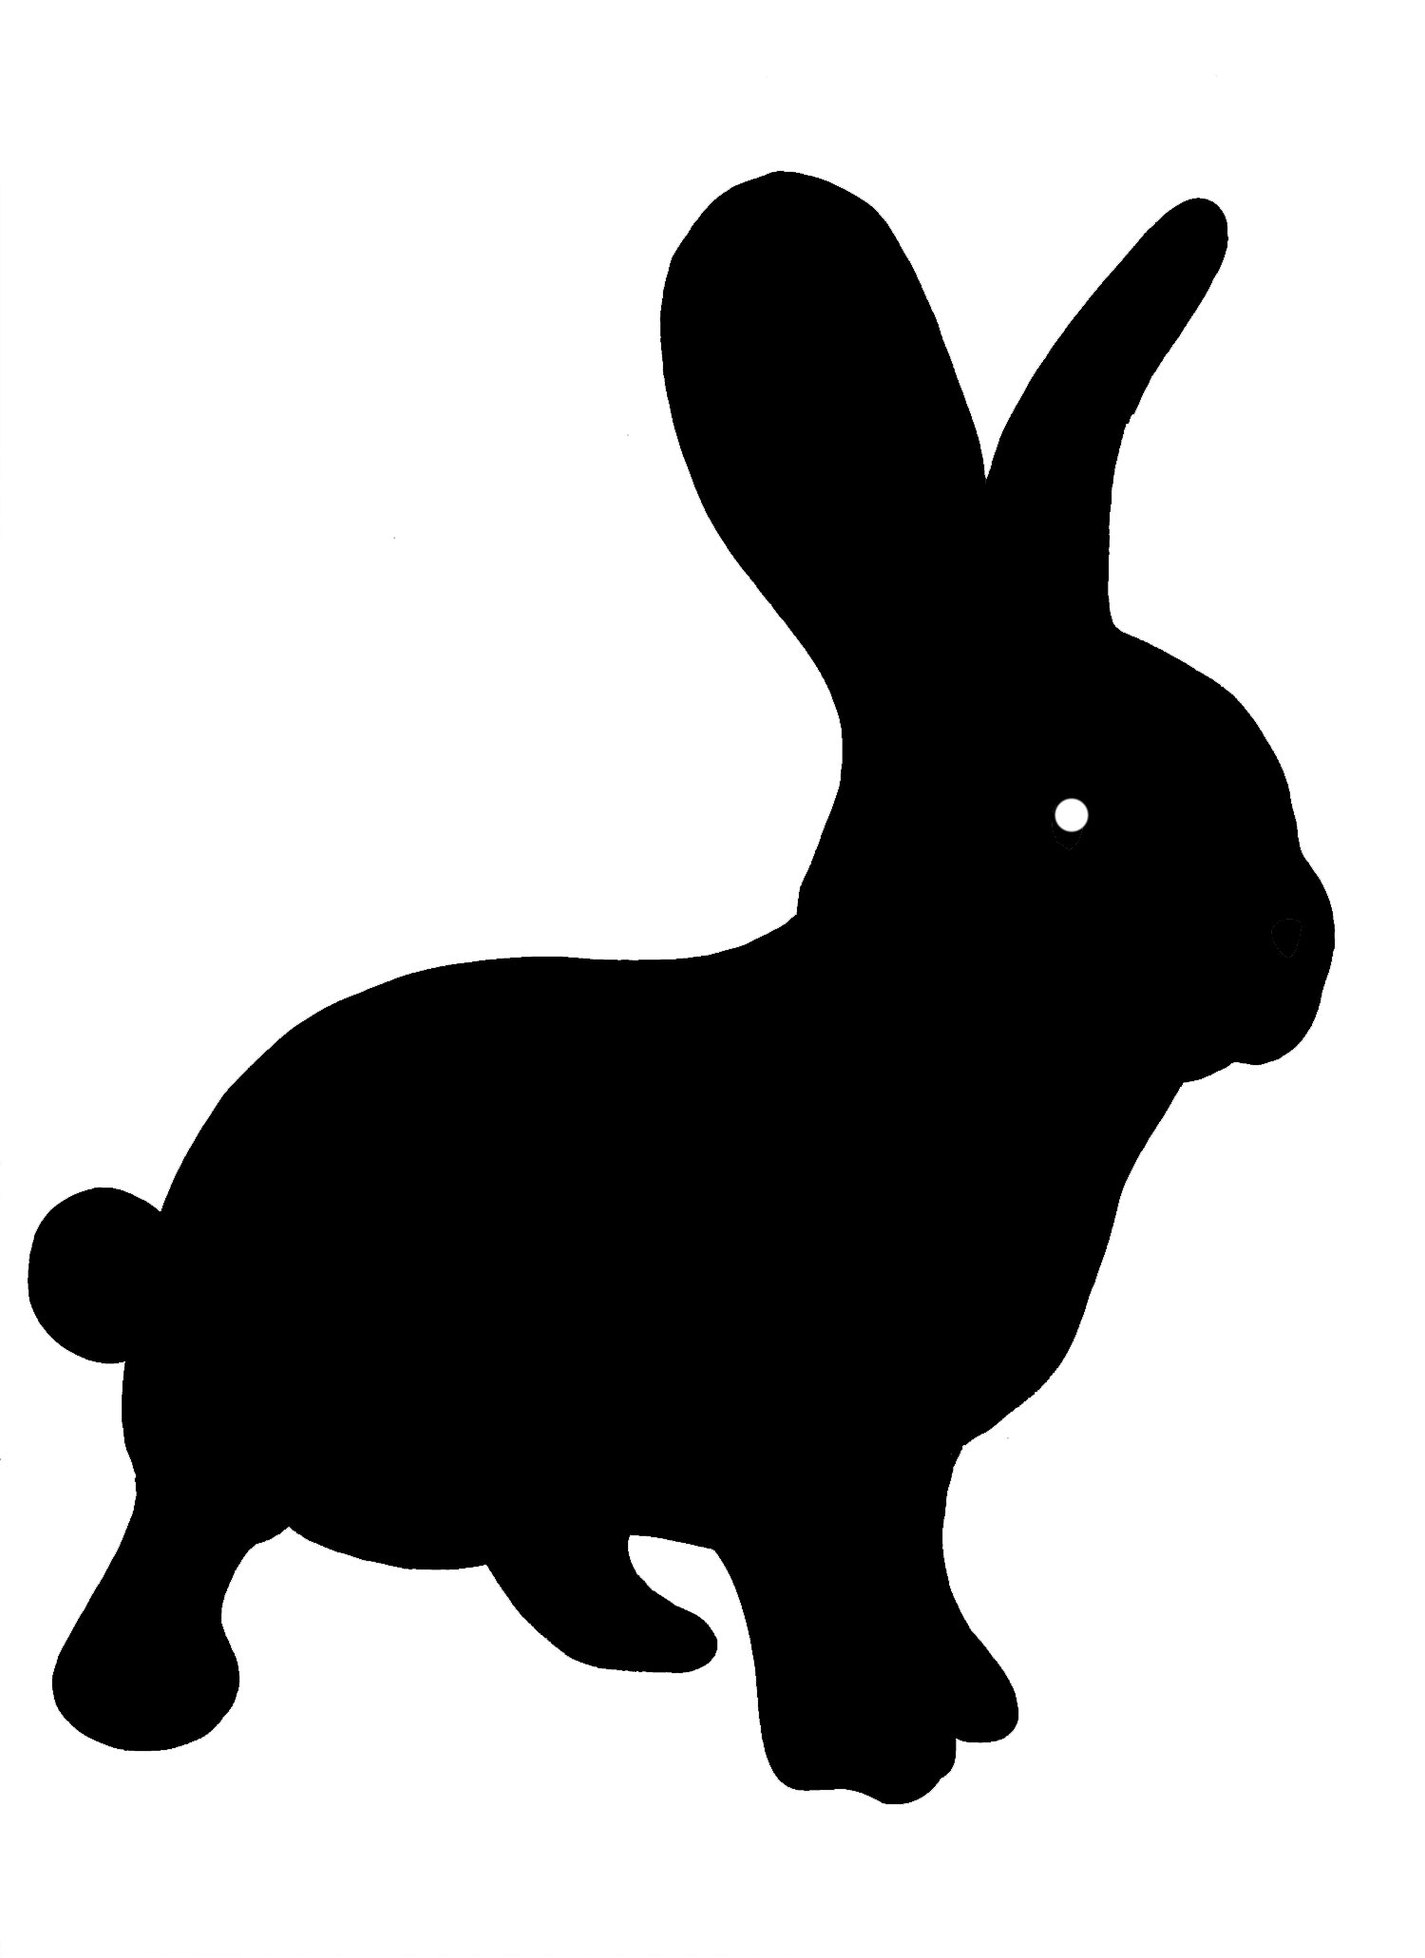 Alice In Wonderland Disney Rabbit Silhouette Clipart - Free to use ...